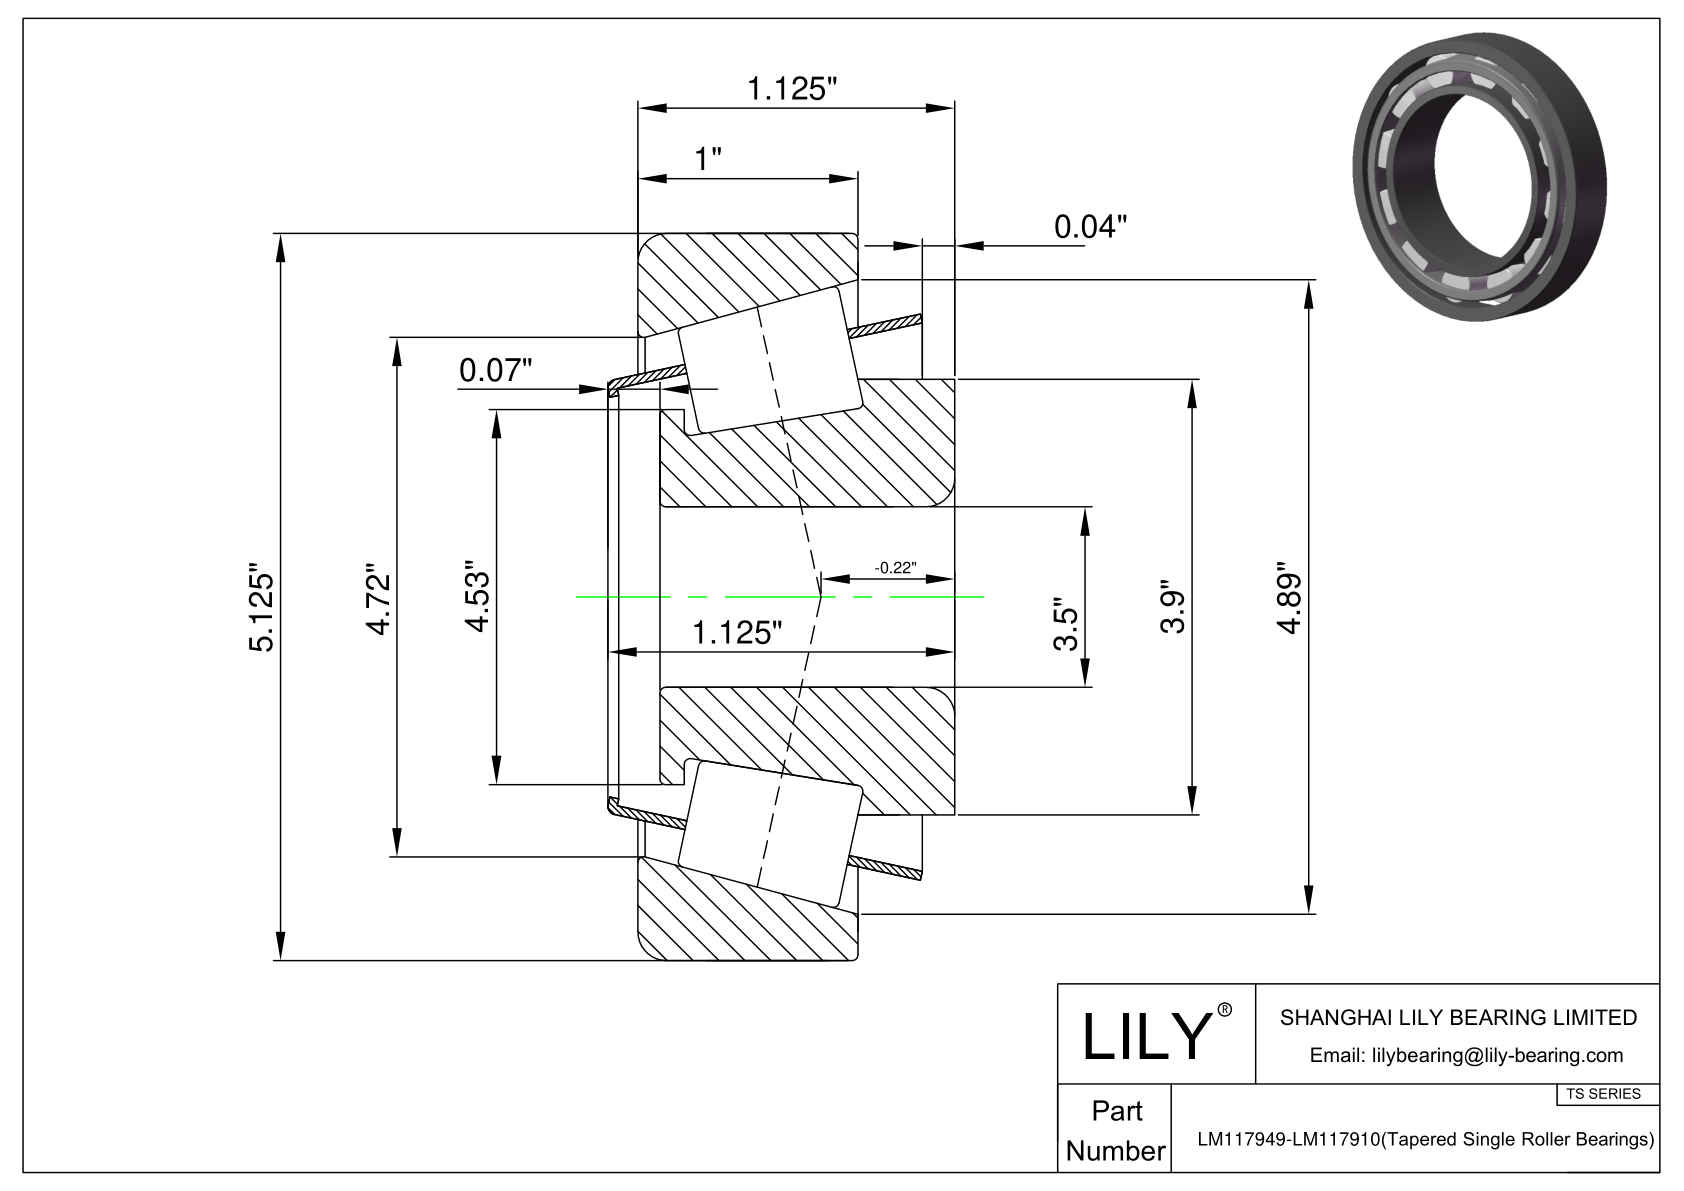 LM117949-LM117910 TS (Tapered Single Roller Bearings) (Imperial) cad drawing